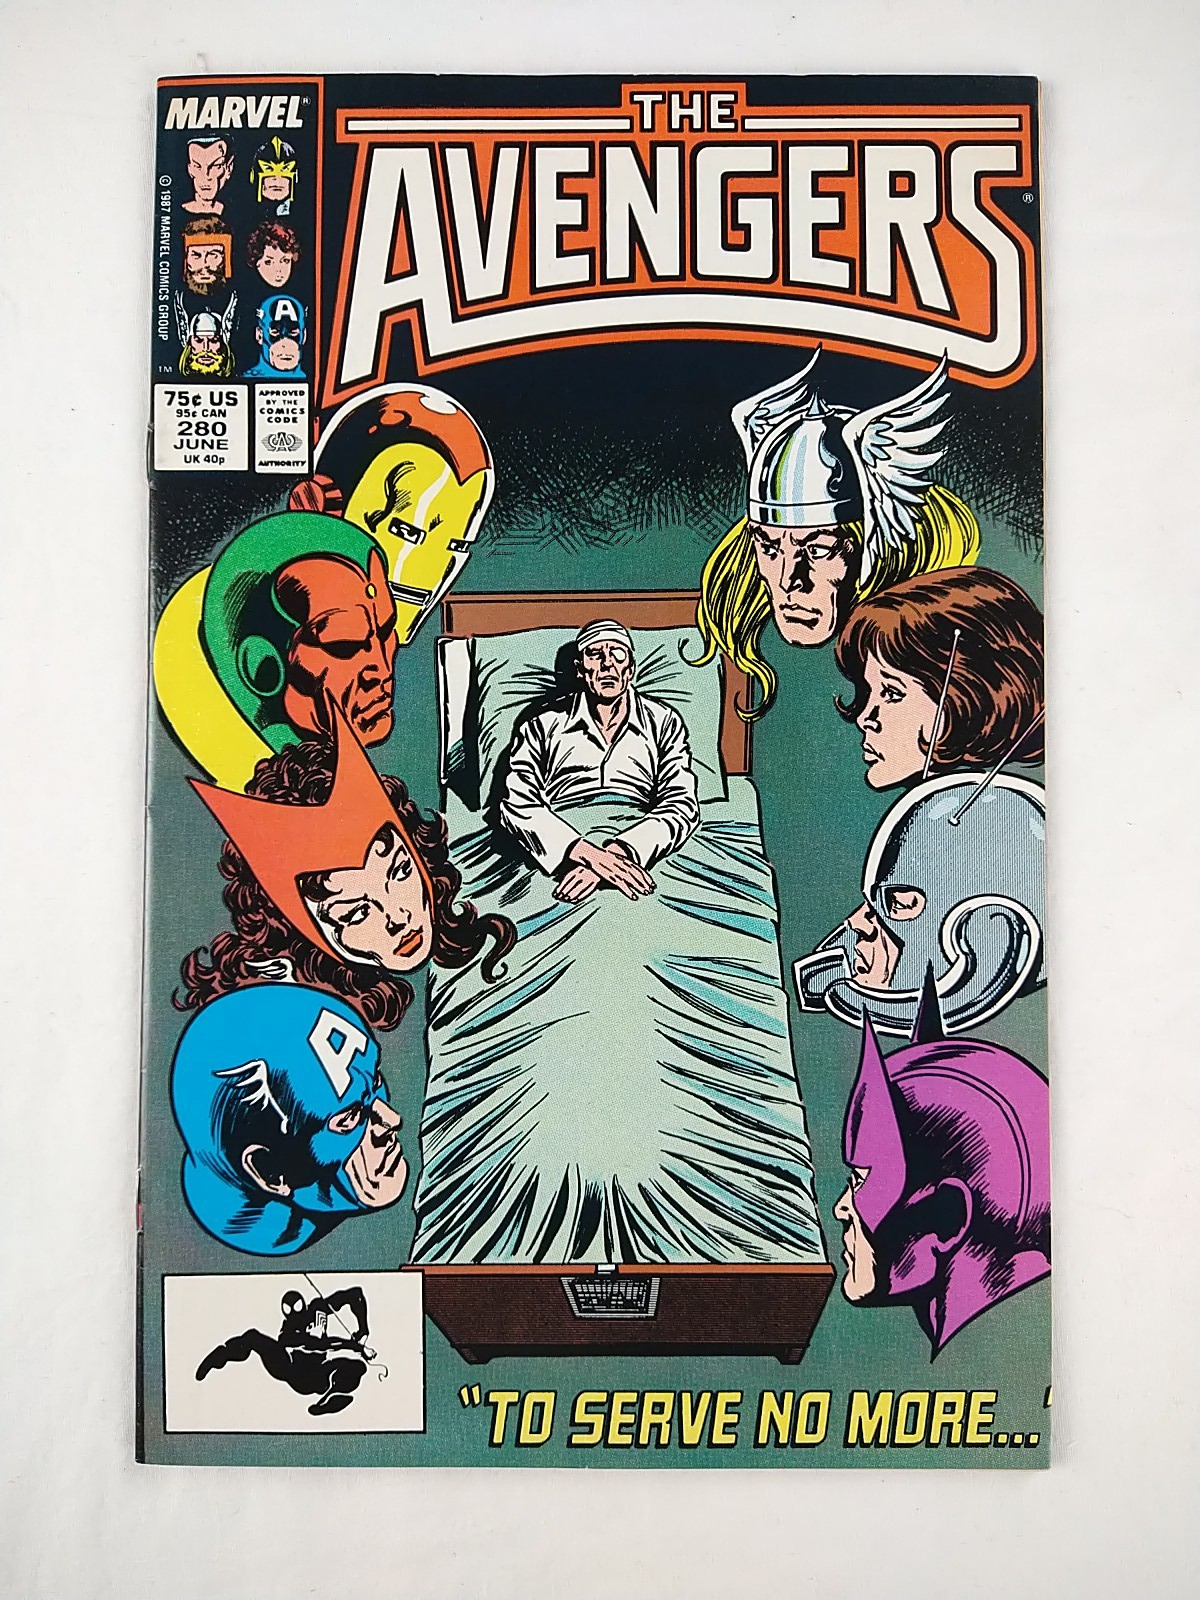 The Avengers #280 (1987 Marvel Comics) Thor Scarlet Witch Vision Jarvis